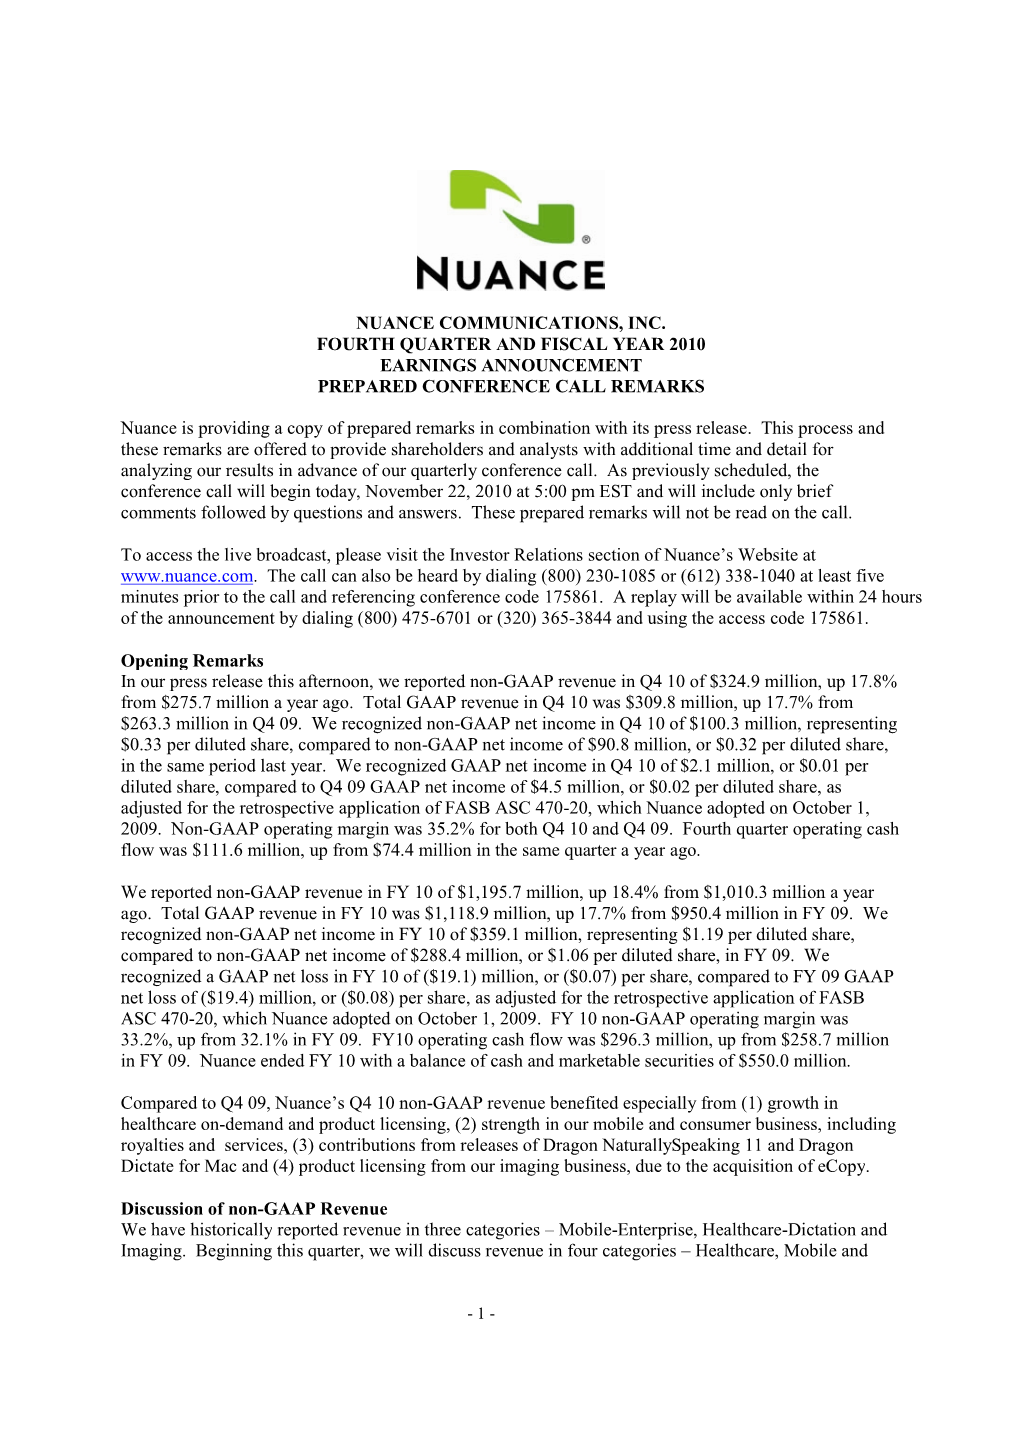 Nuance Communications, Inc. Fourth Quarter and Fiscal Year 2010 Earnings Announcement Prepared Conference Call Remarks